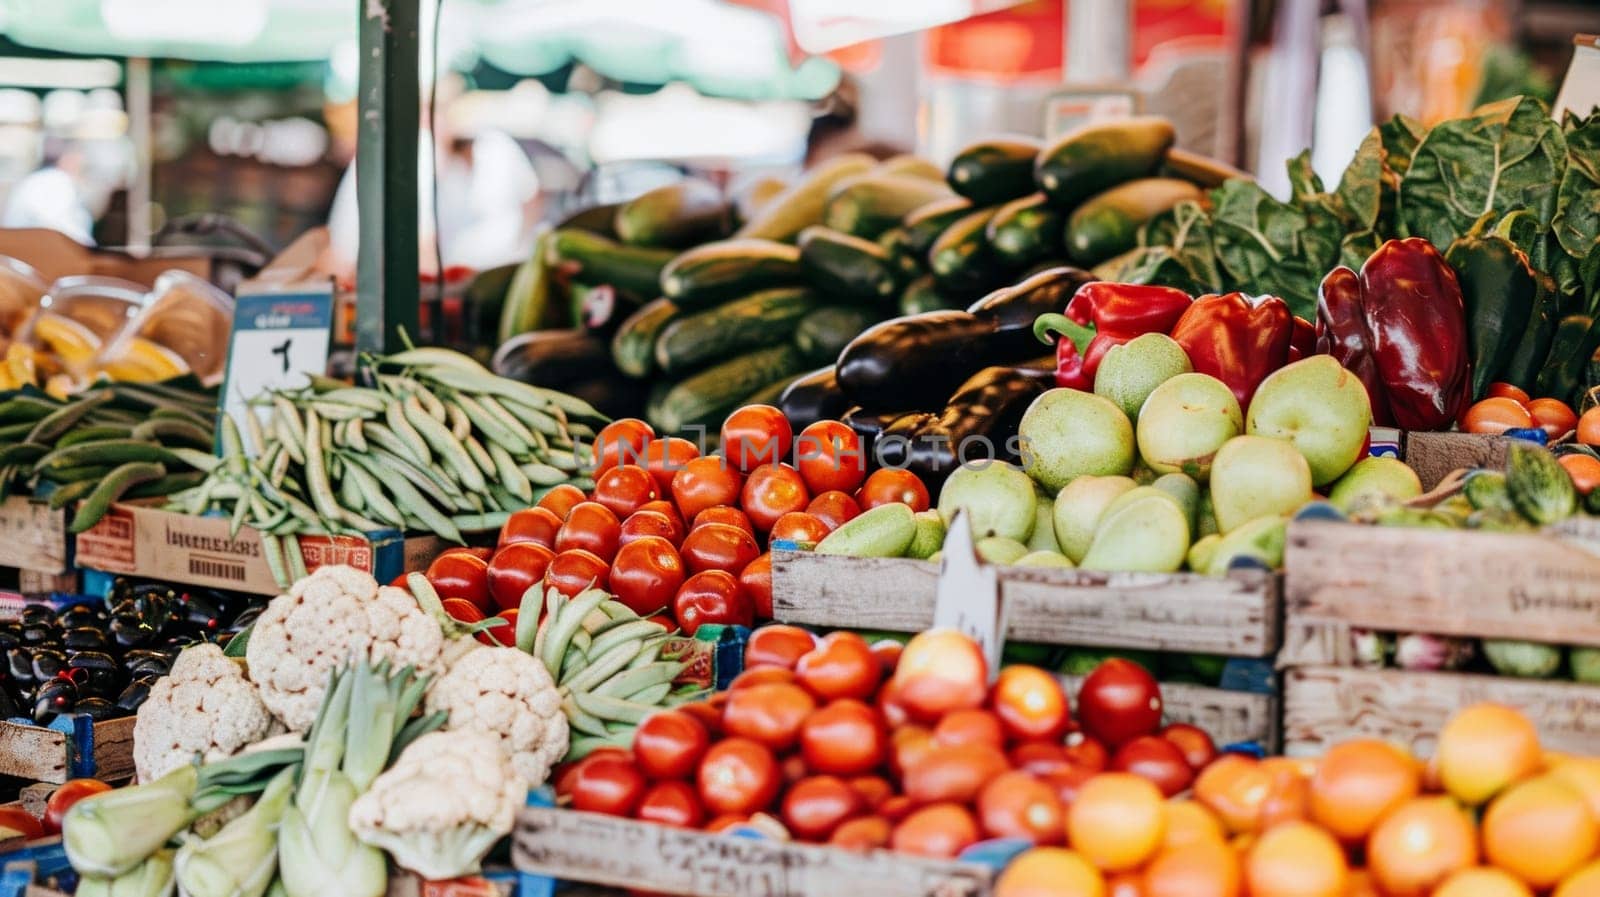 An assortment of colorful fresh produce from a farmers market, featuring vegetables and fruits on a bustling market stand